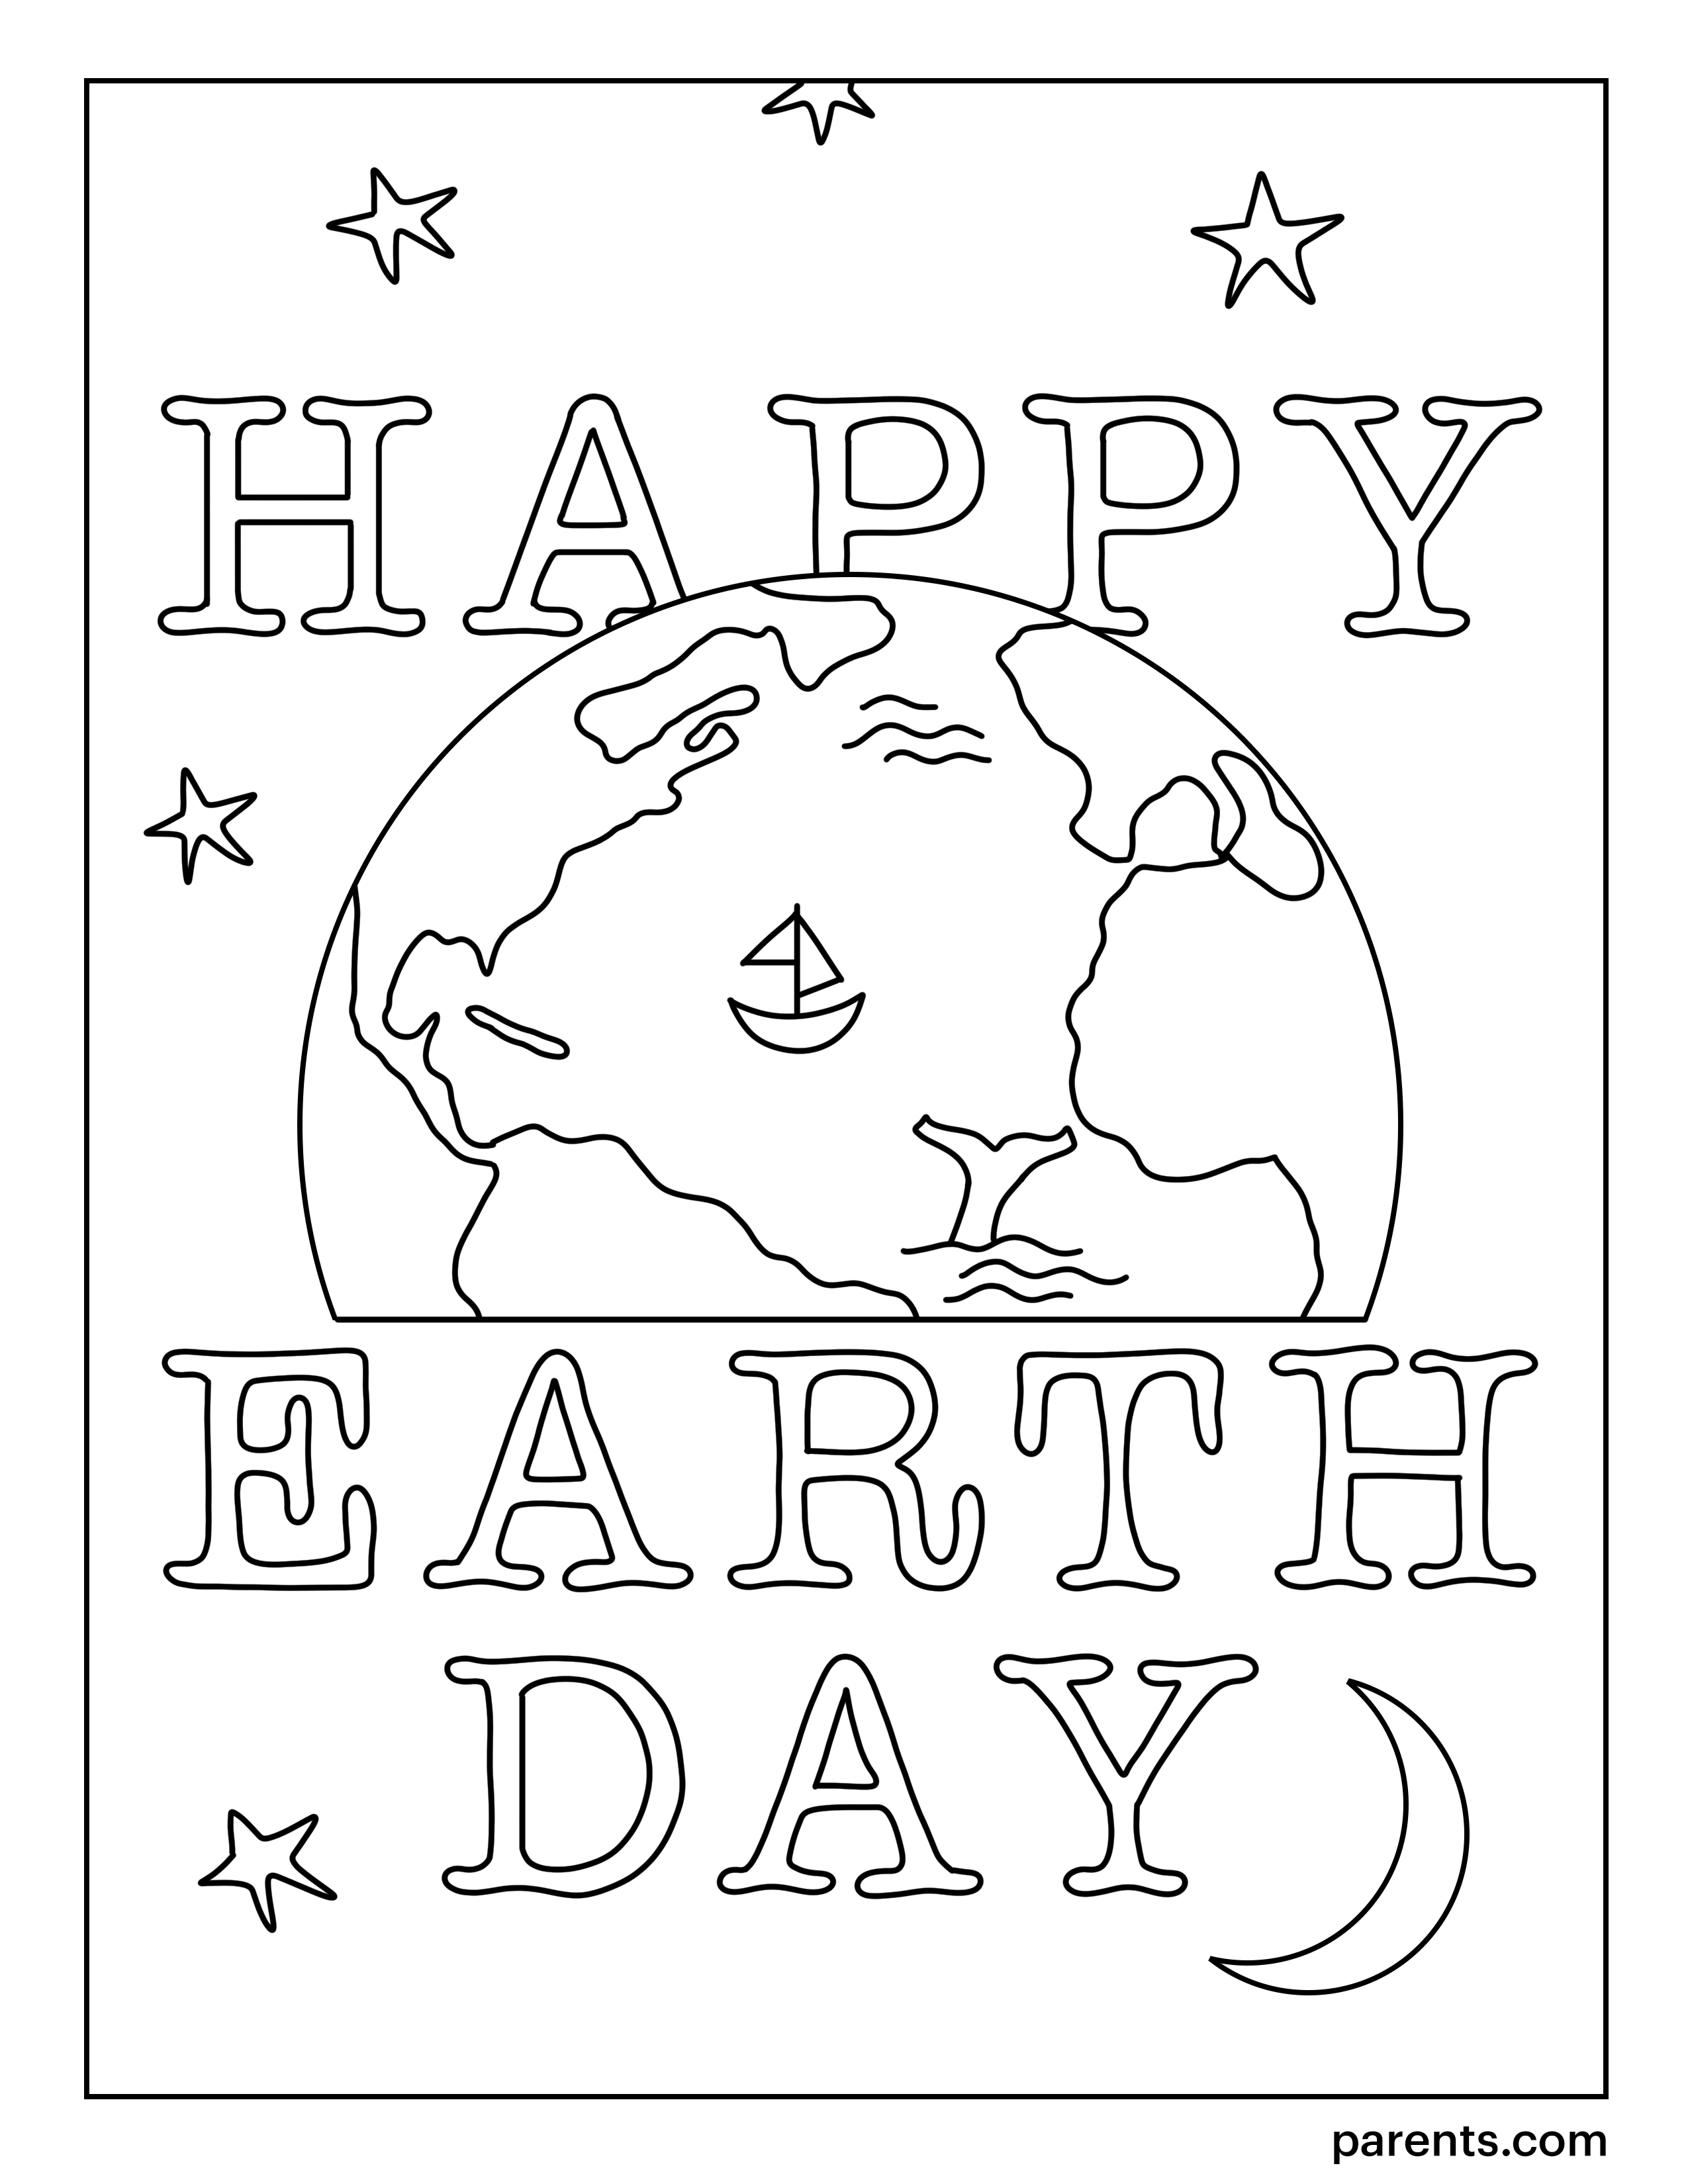 10 Free Earth Day Coloring Pages for Kids | Parents